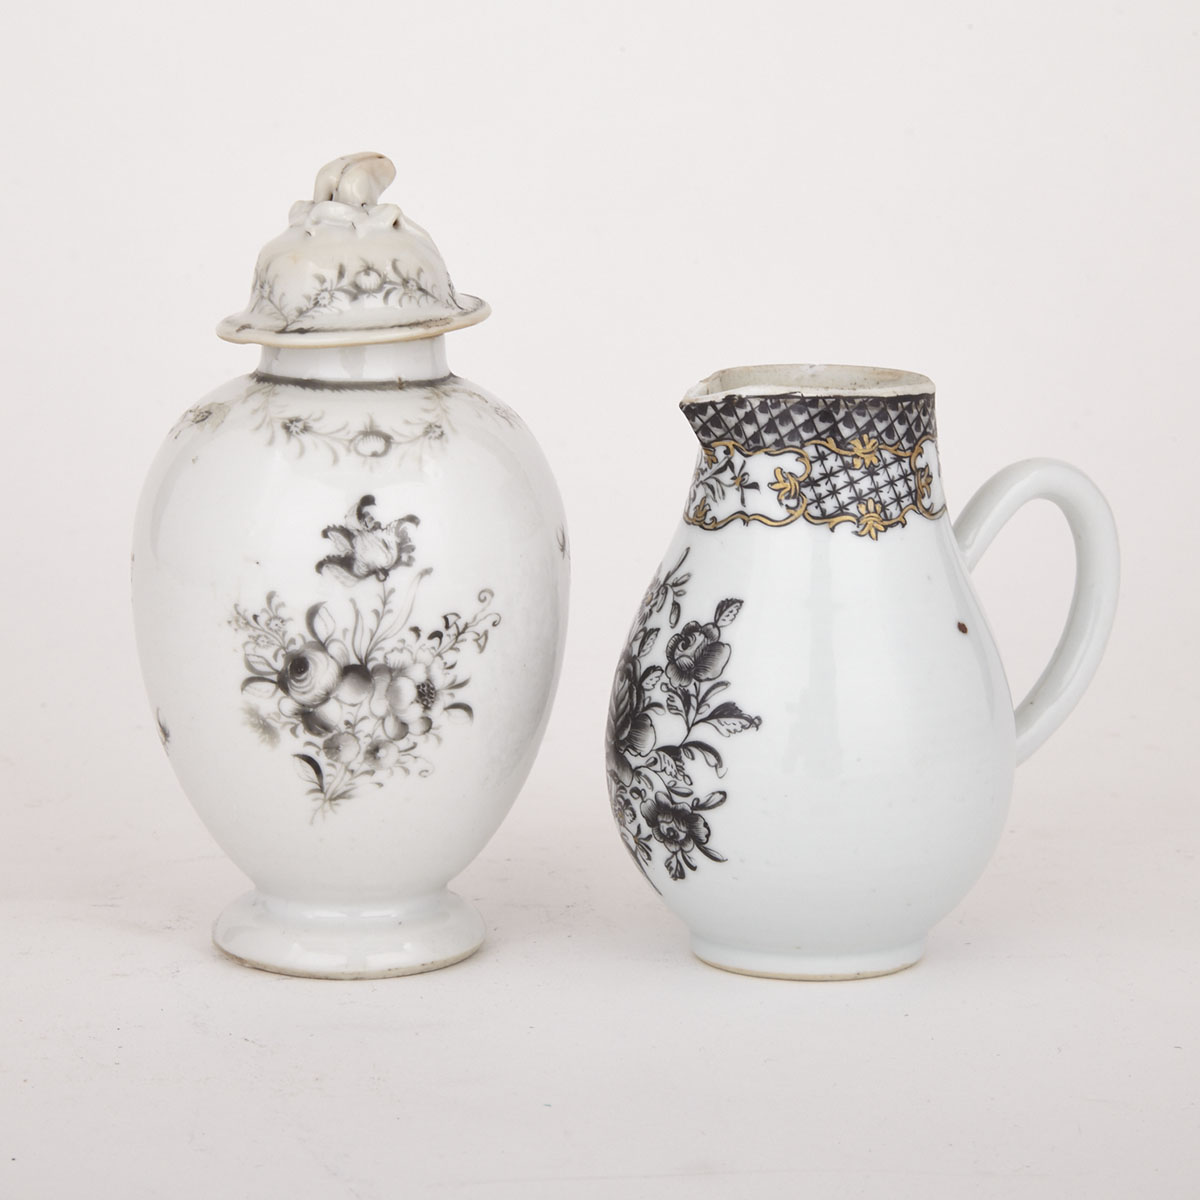 Matched Pair of Chinoiserie Porcelain Jar with Lid and Pitcher, 19th C. 